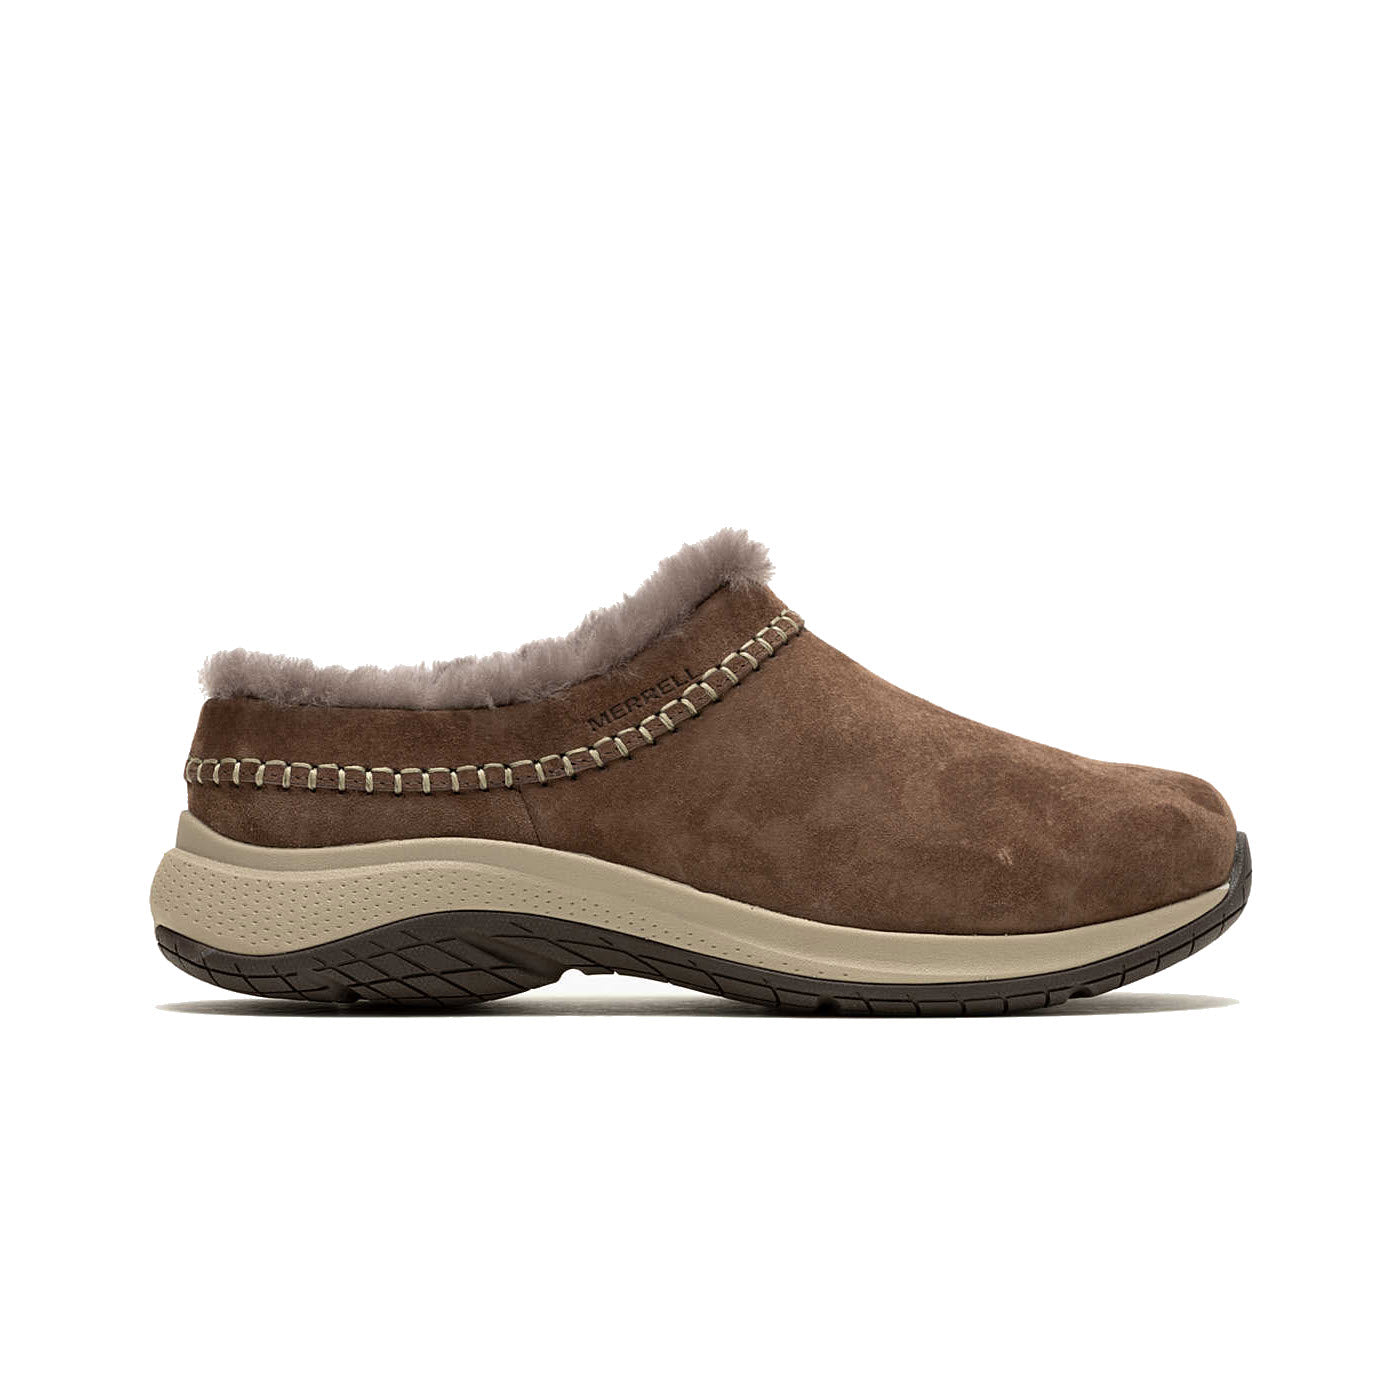 Side view of a Merrell Encore Ice 5 Bracken - Womens with sheepskin lining and a decorative horizontal zipper.